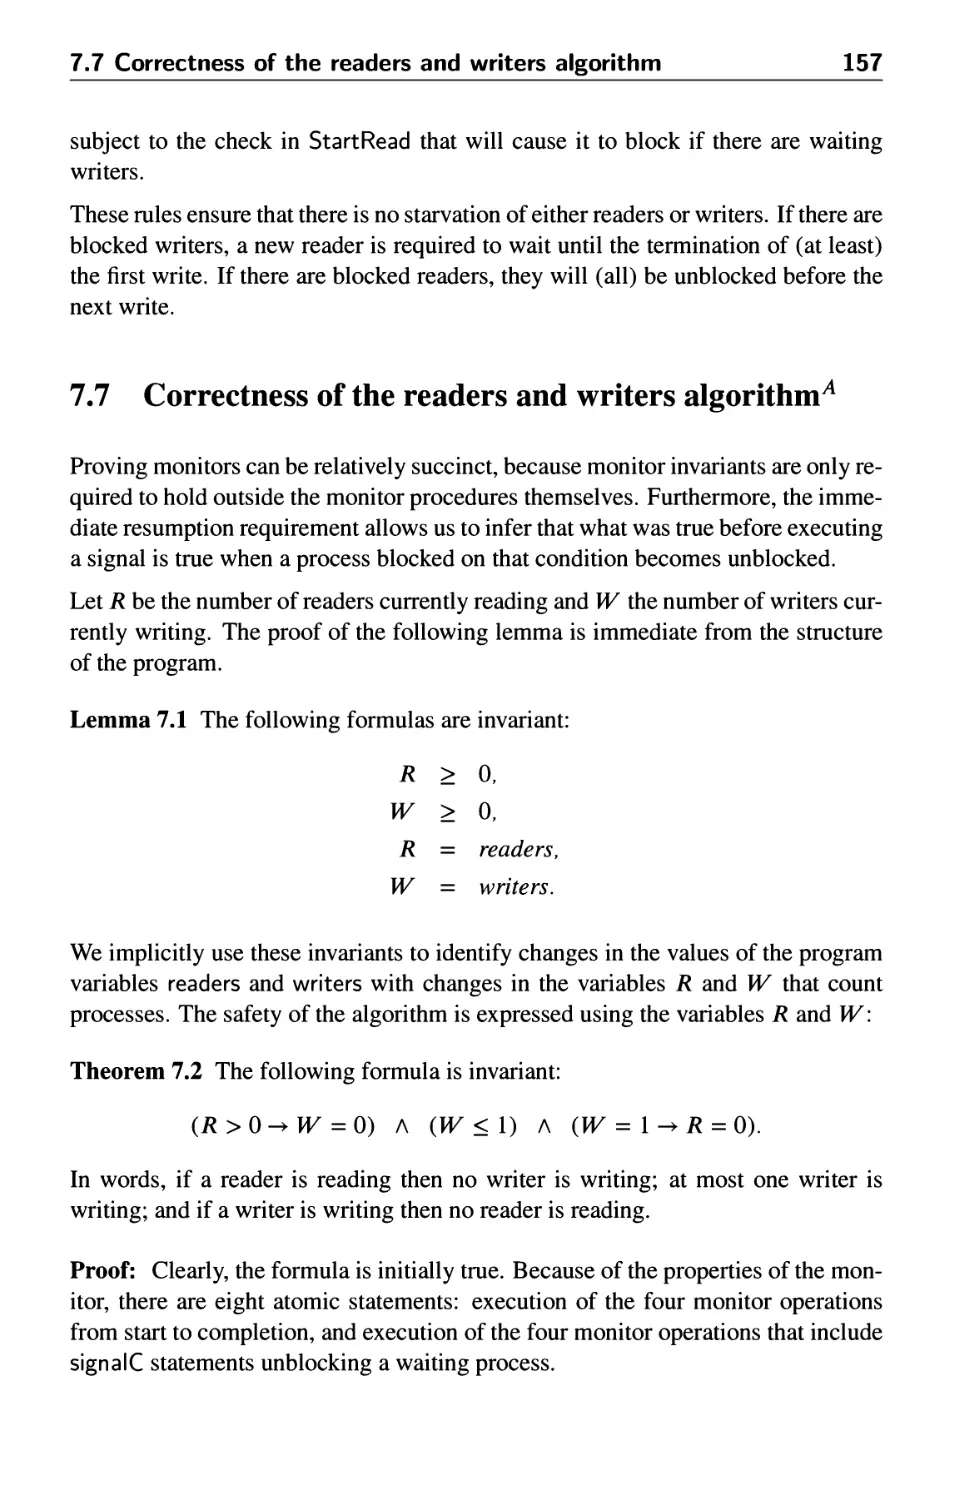 7.7 Correctness of the readers and writers algorithm